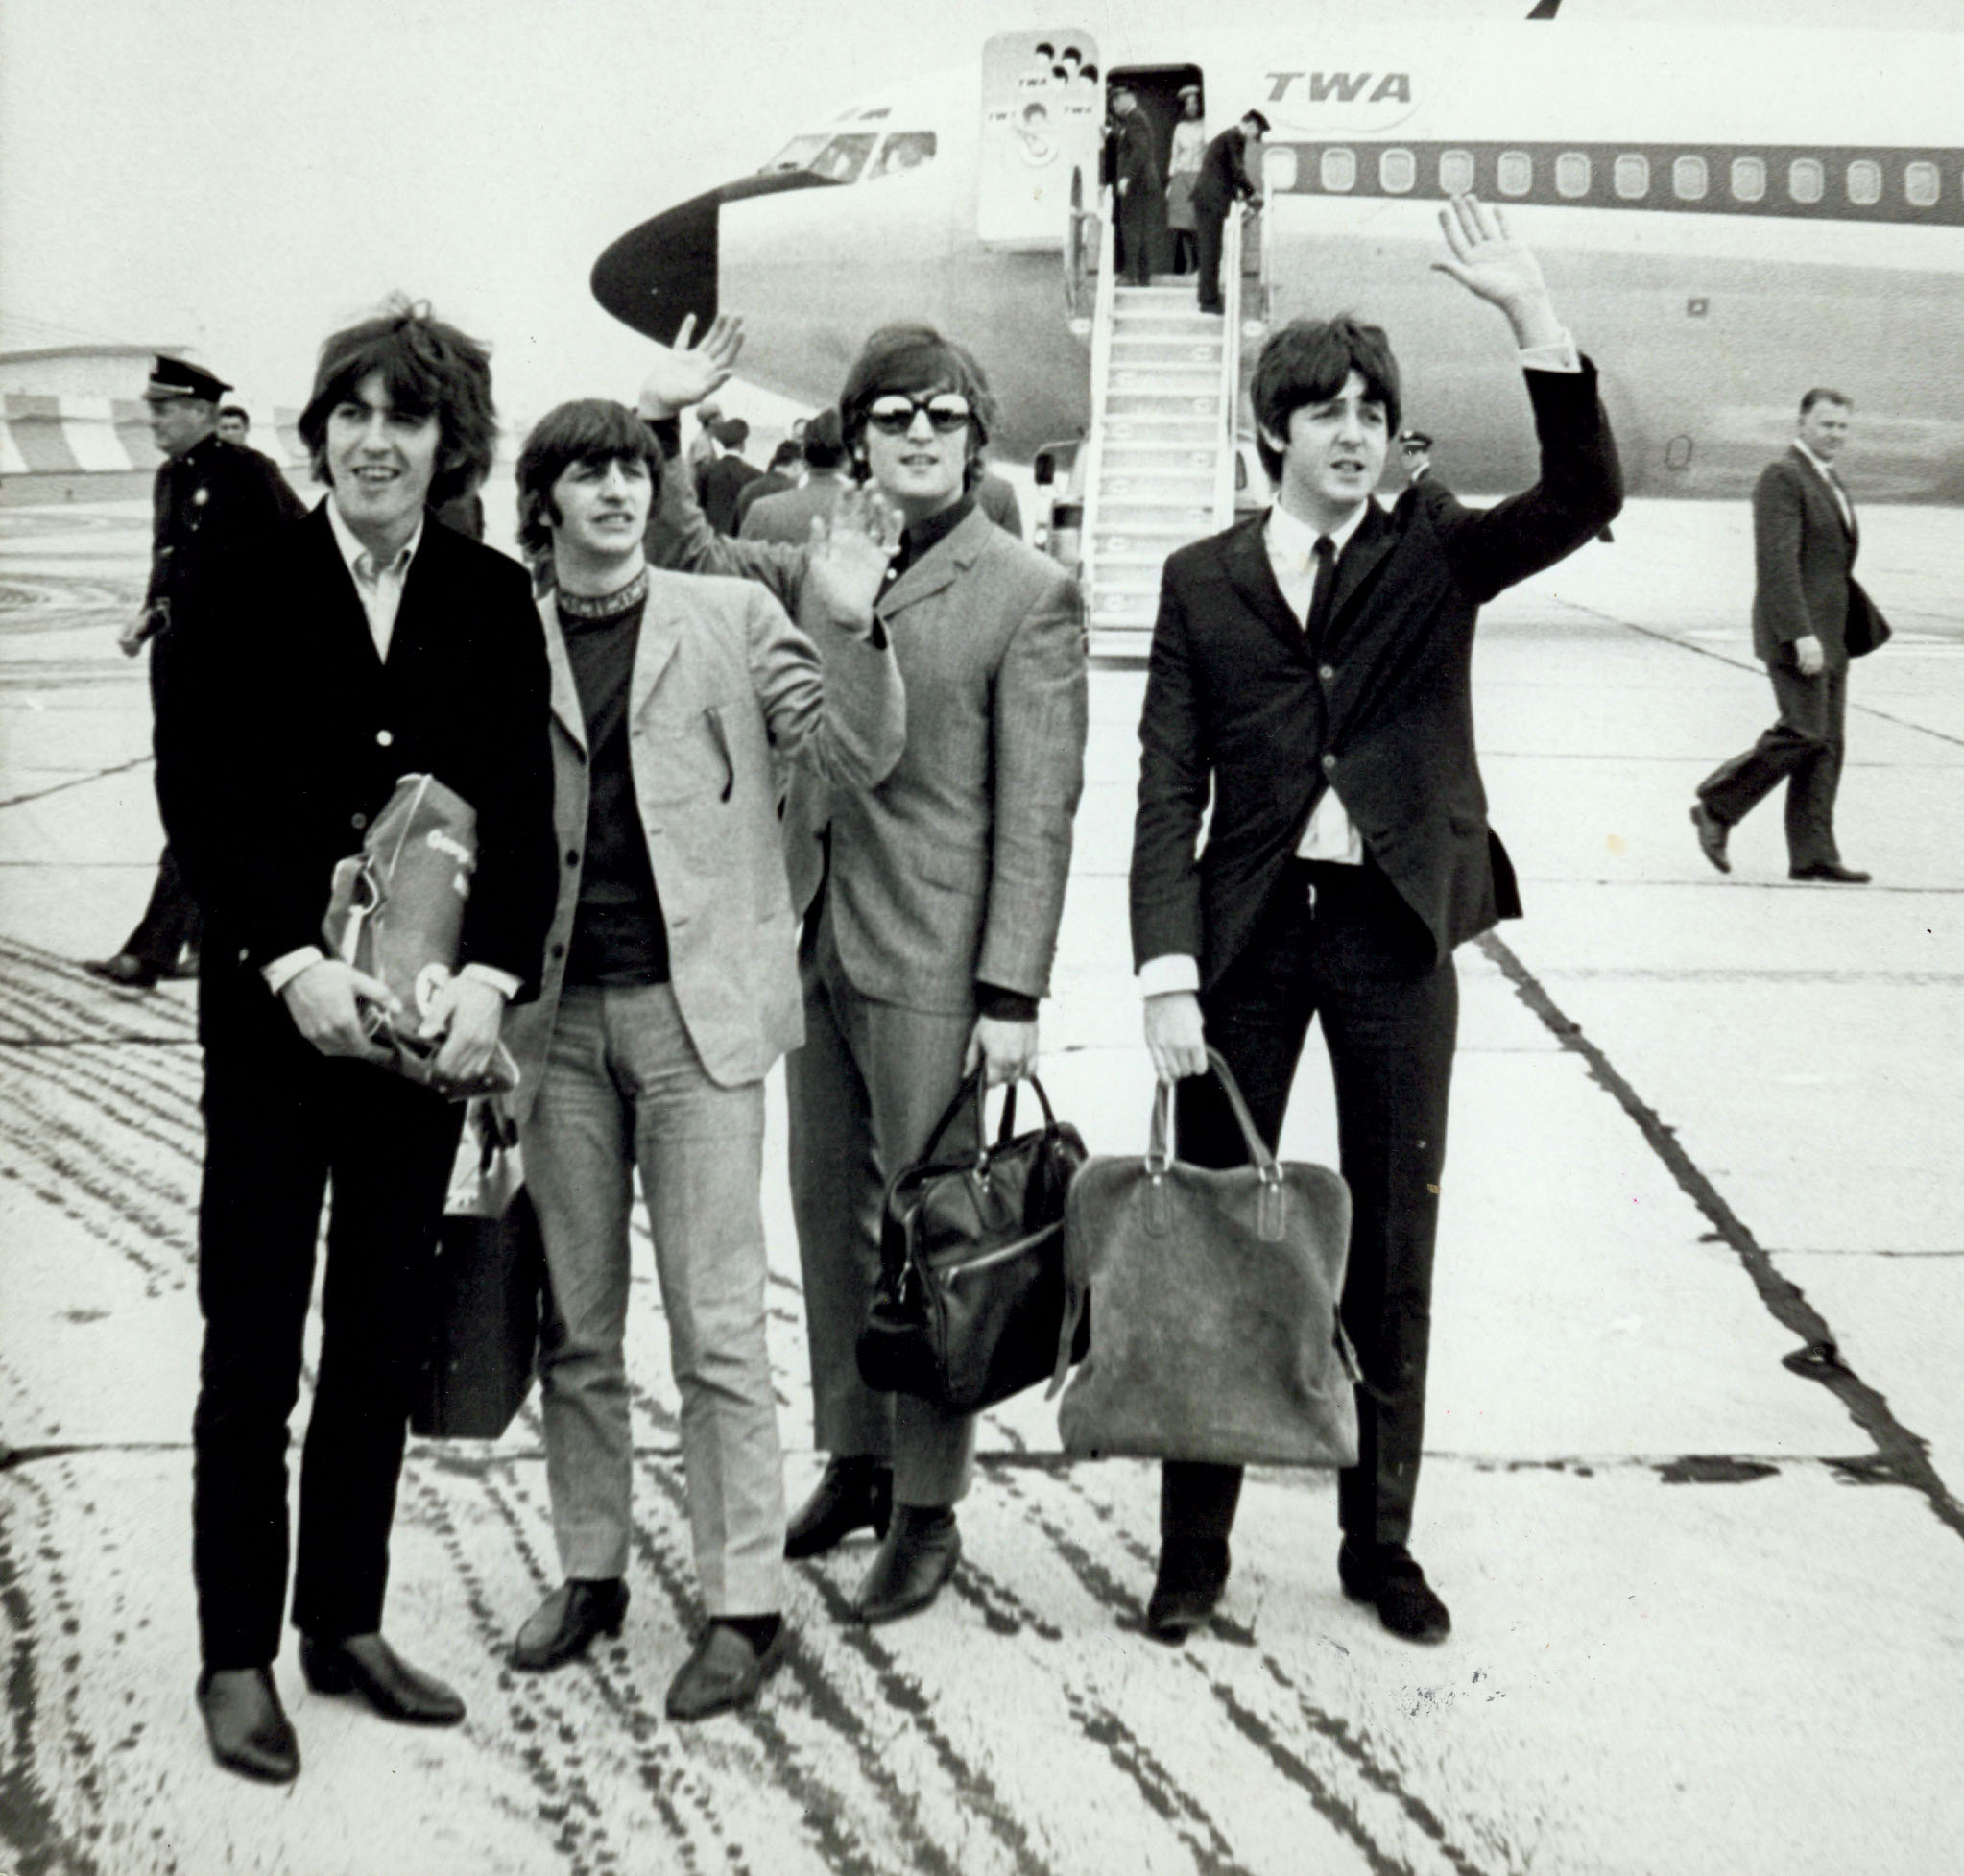 Feb 27, 1964; New York, NY, USA; File Photo. The Beatles: JOHN LENNON, GEORGE HARRISON, RINGO STARR, PAUL MCCARTNEY arrive in New York. February 2004 marks the 40th Anniversary of Beatlemania and thier first visit to the USA. The Fab 4 celebrates their Fab 40.,Image: 210146693, License: Rights-managed, Restrictions: , Model Release: no, Credit line: KEYSTONE Pictures USA / Zuma Press / Profimedia